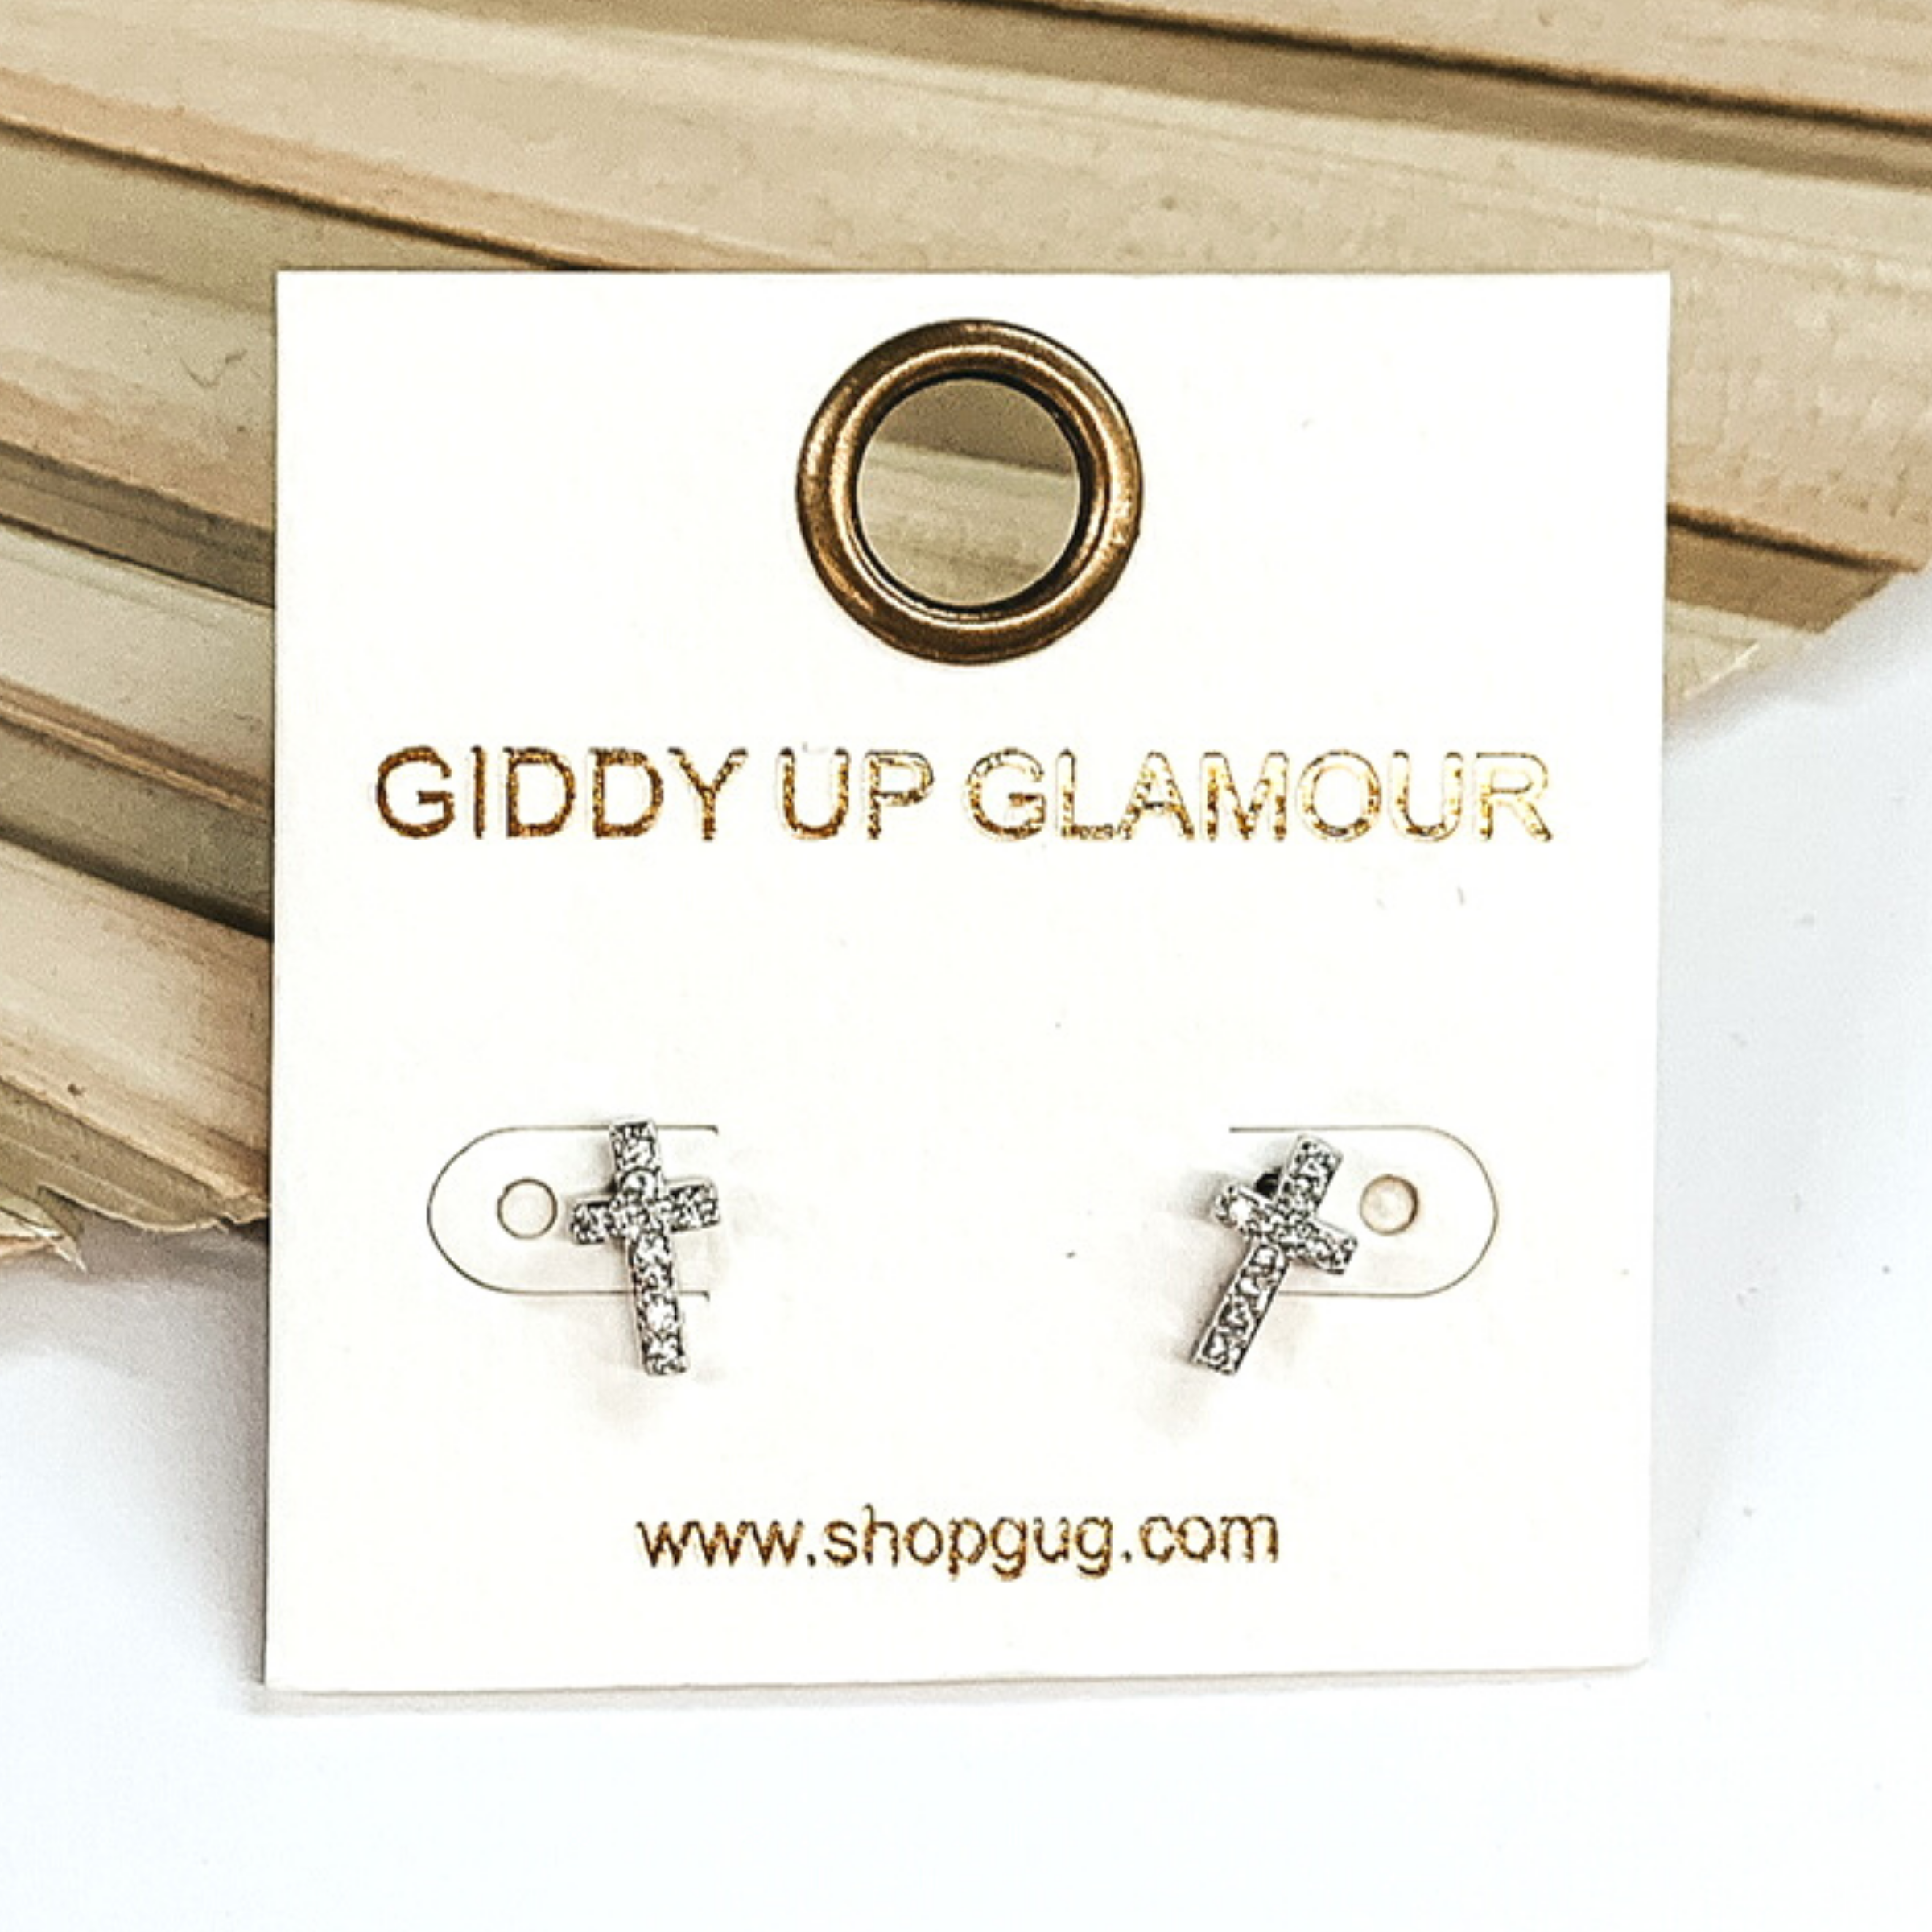 Small, silver cross stud earrings with clear crystals. These earrings are pictured on a white earrings card on a white and brown background.